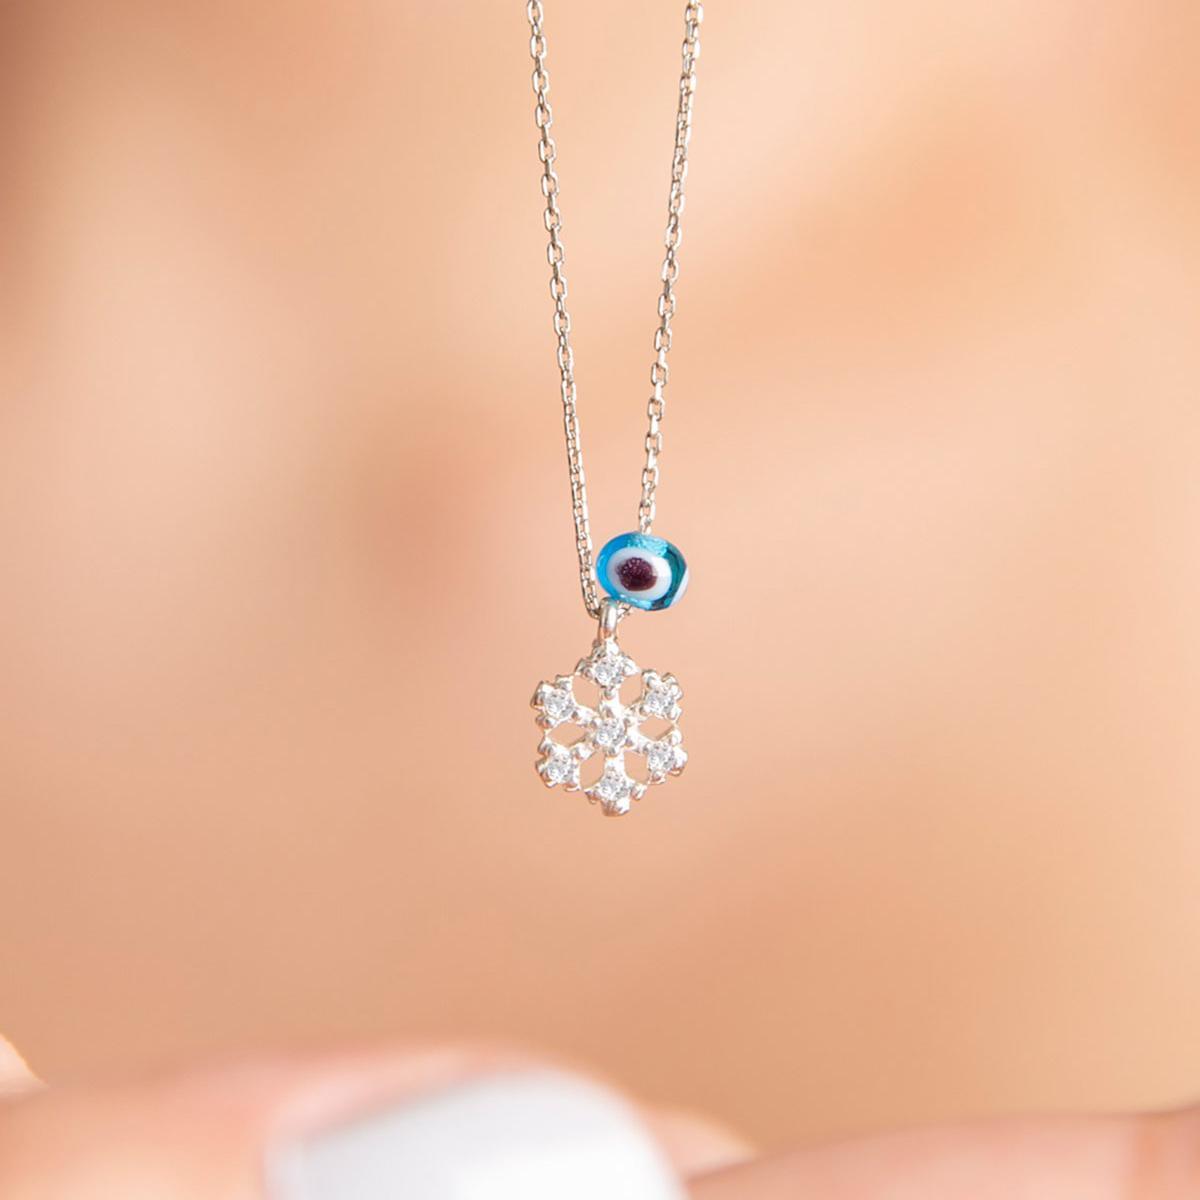 Snowflake Necklace Diamond Evil Eye • Real Evil Eye Necklace - Trending Silver Gifts